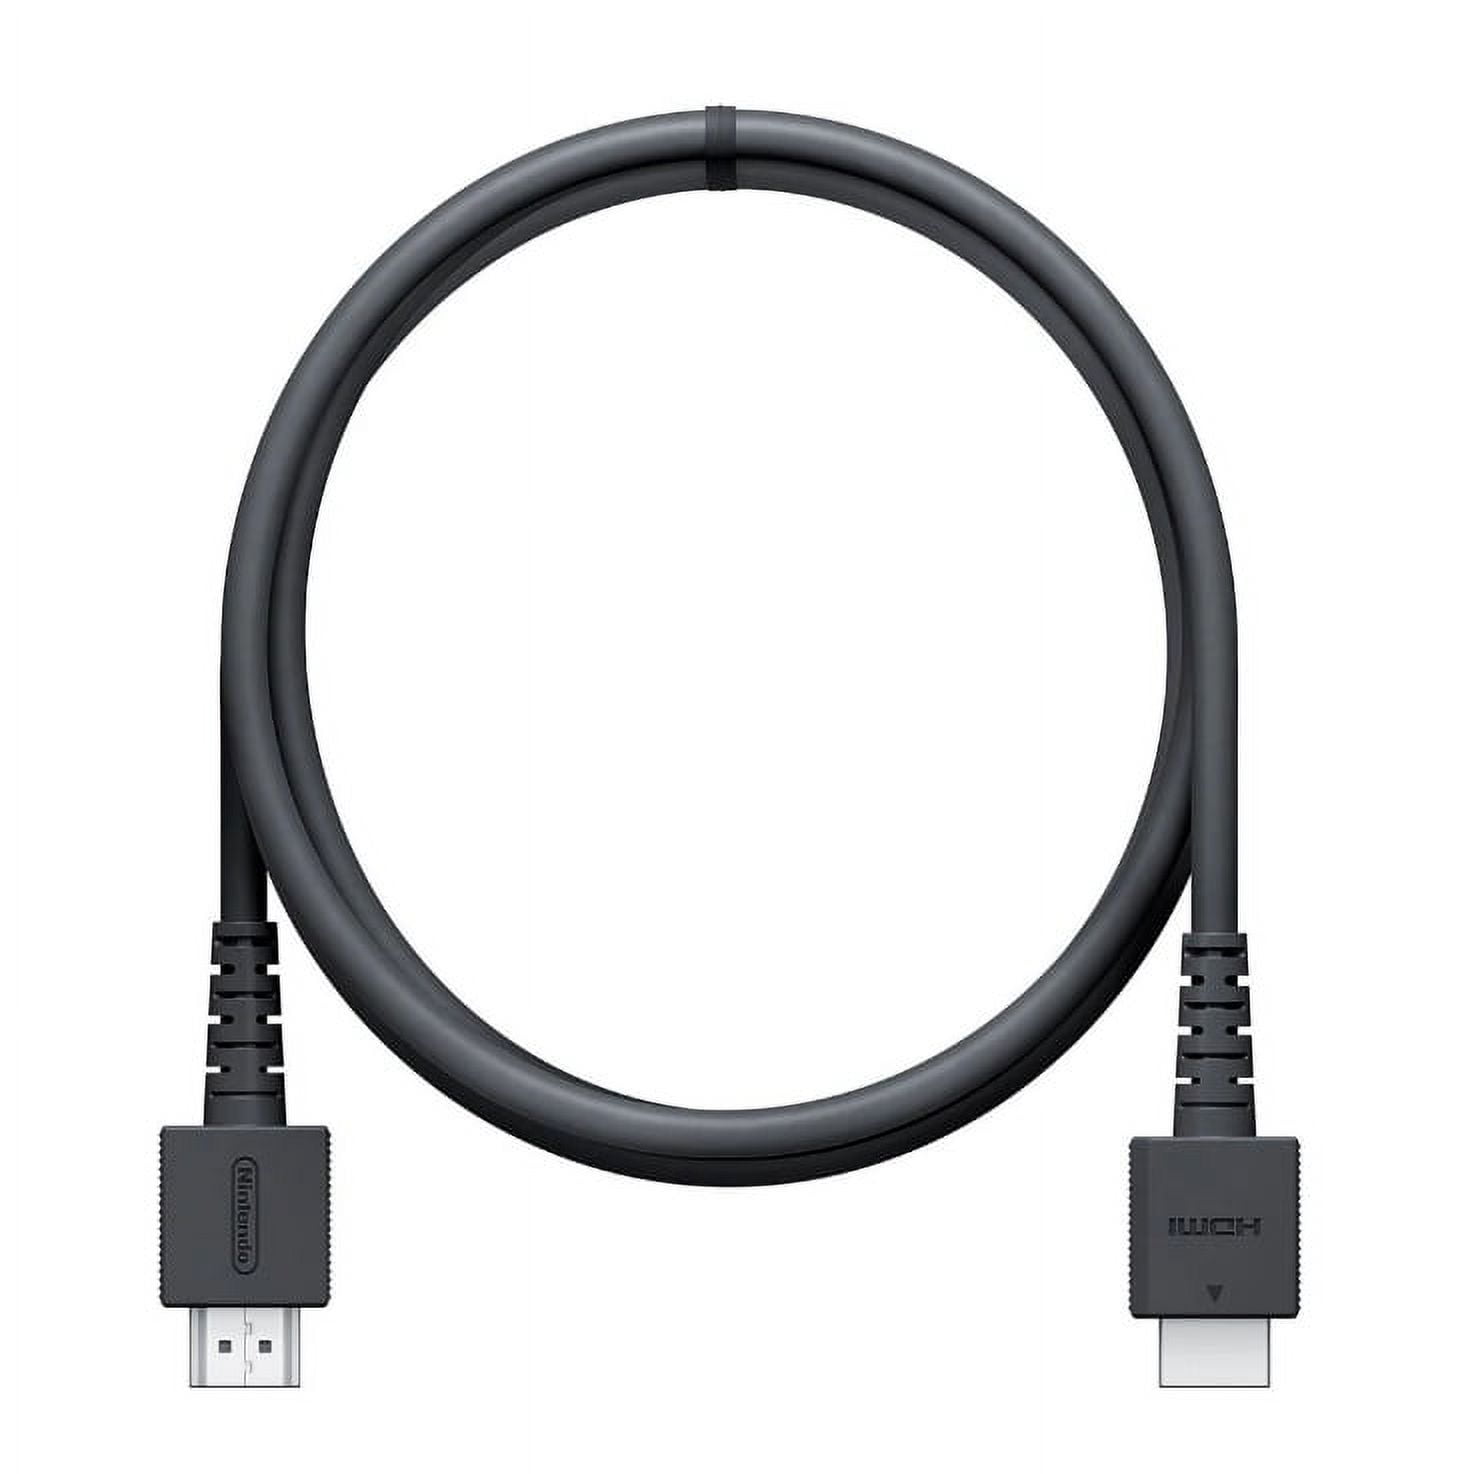 Nintendo Switch HDMI Cable